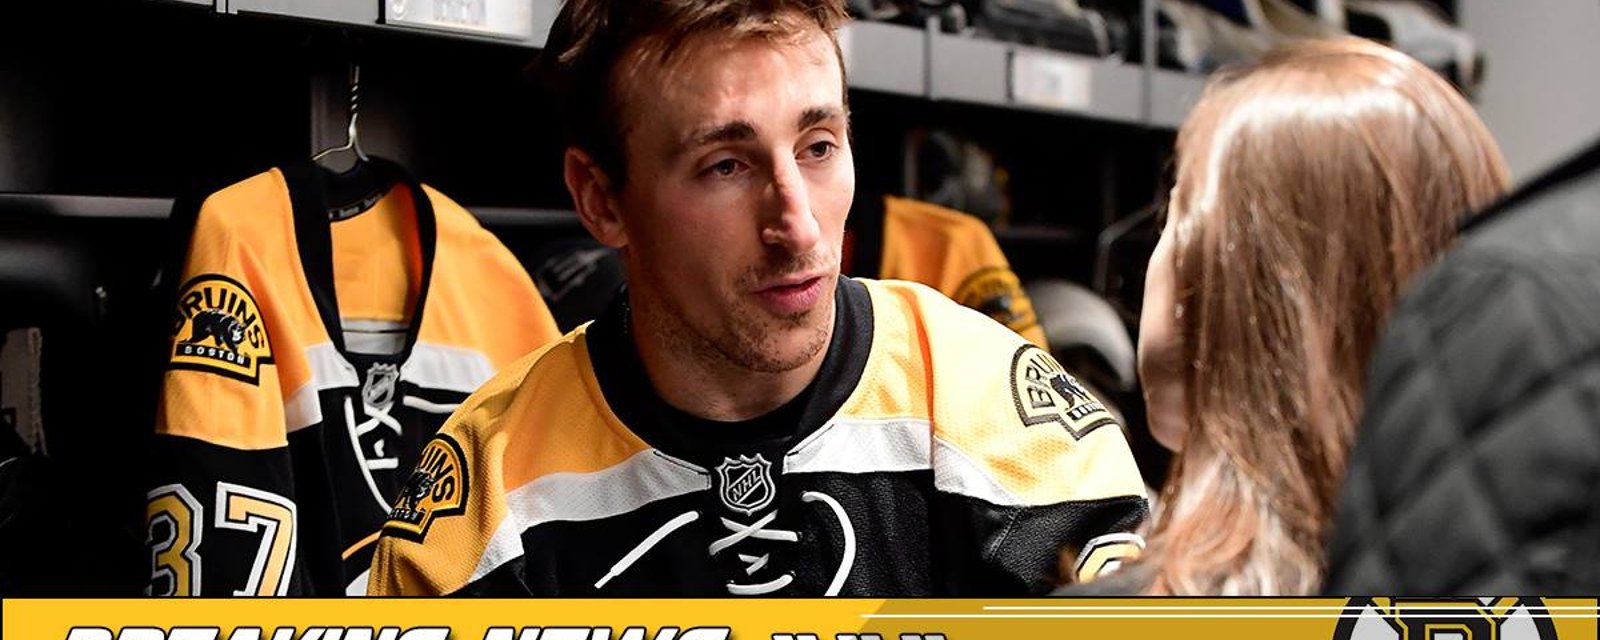 Breaking: Bruins update on Brad Marchand is not good. 